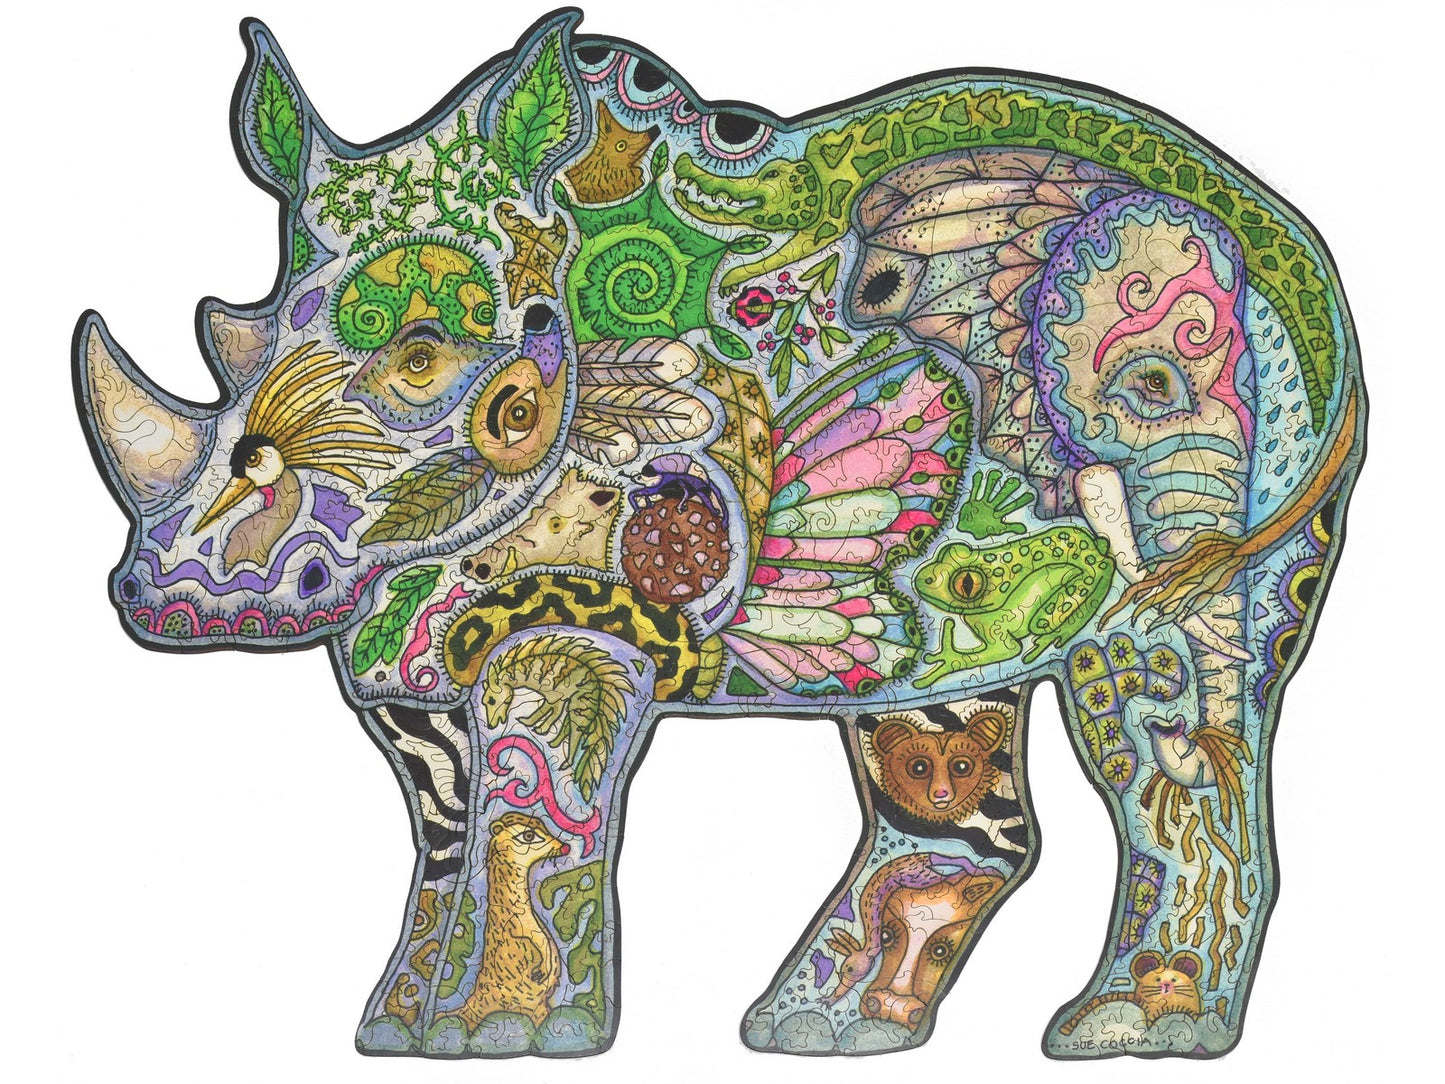 The front of the puzzle Rhino.